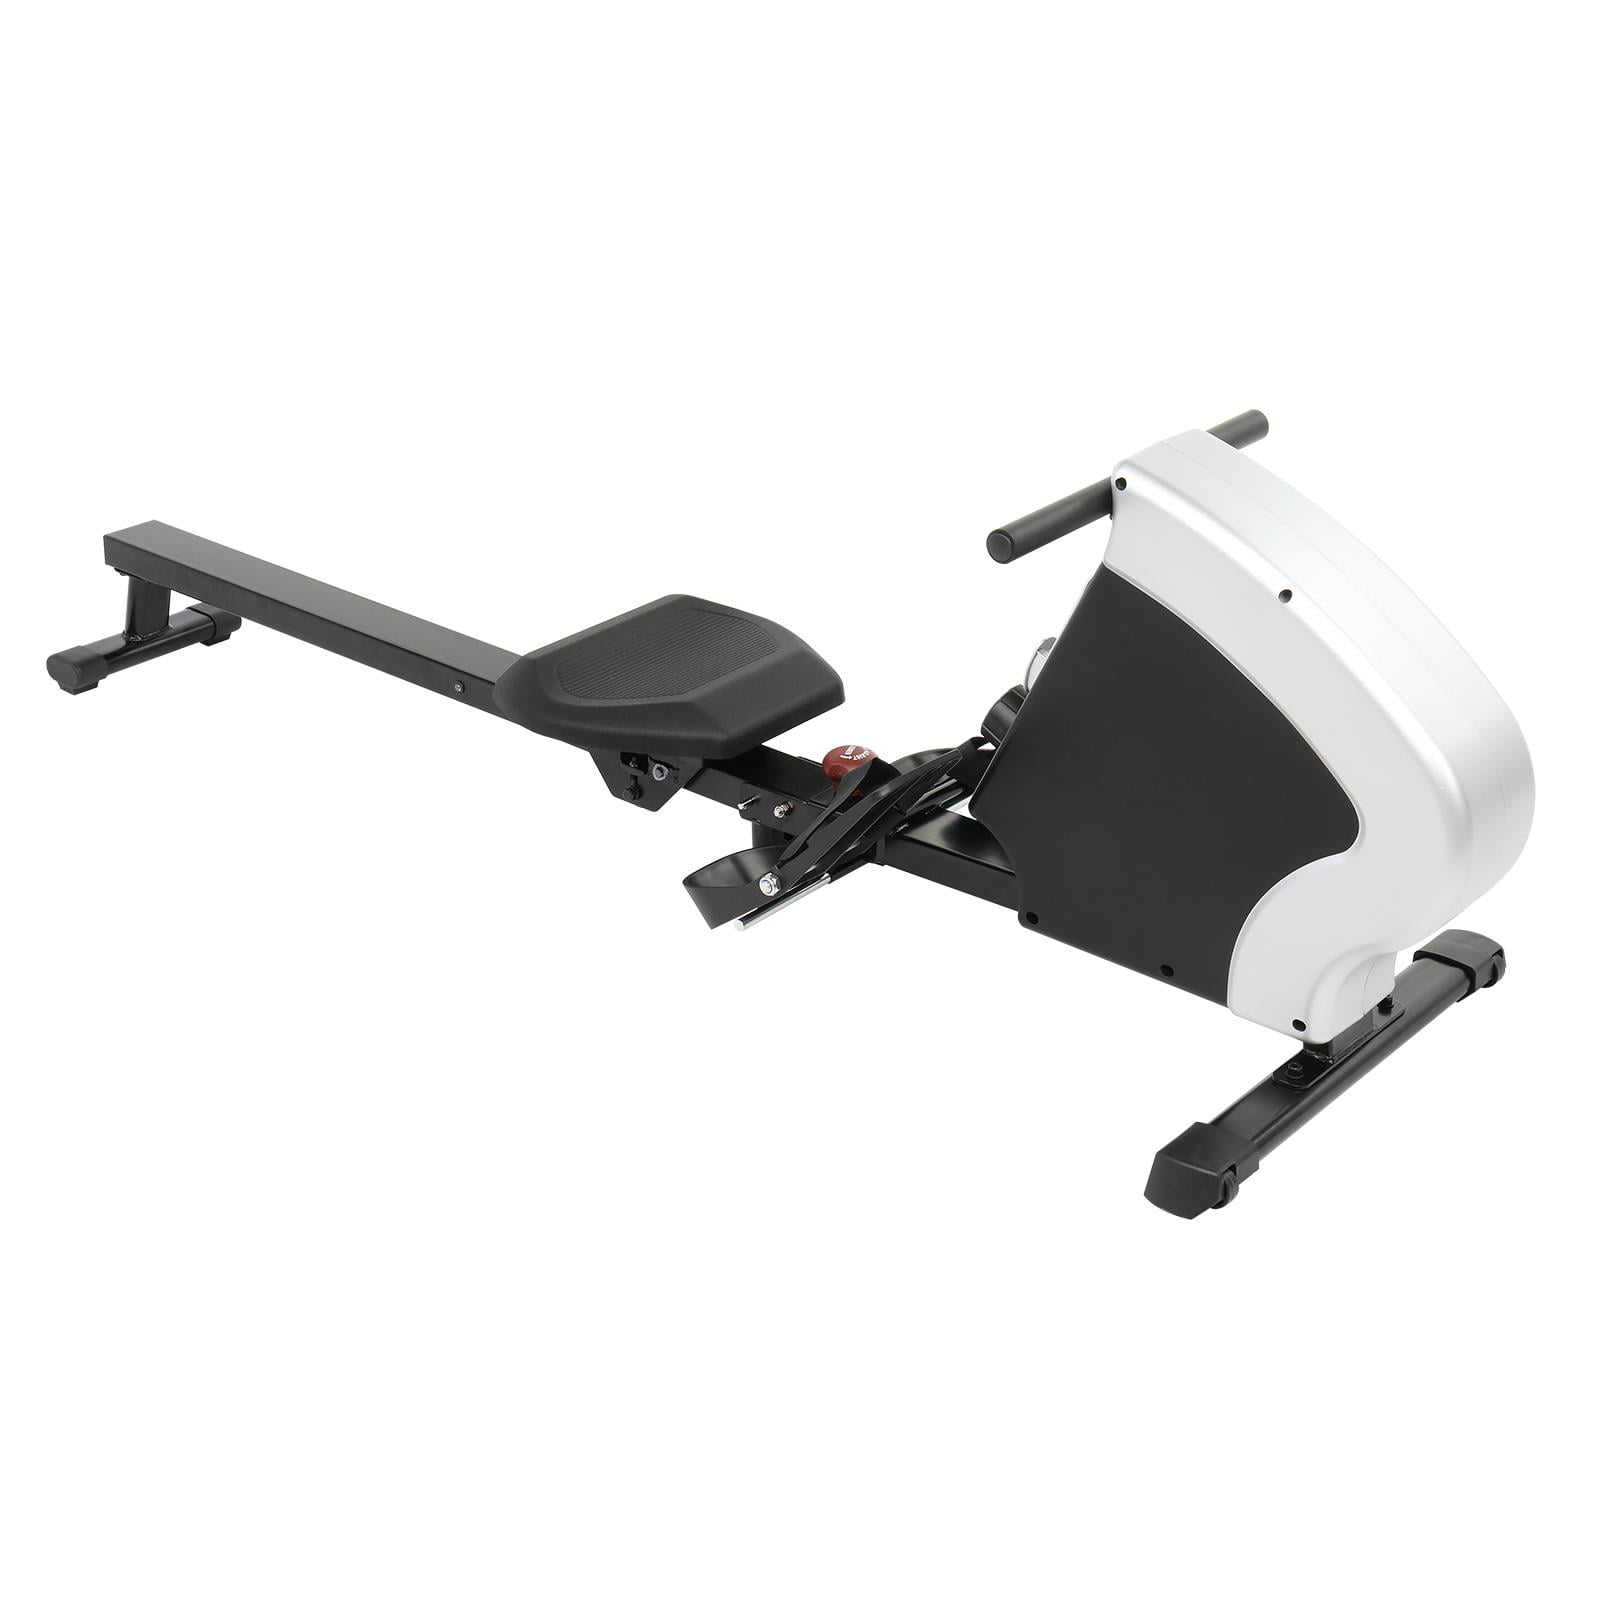 Magnetic Rower,Magnetic Rower Rowing Machine,Magnetic Rower 